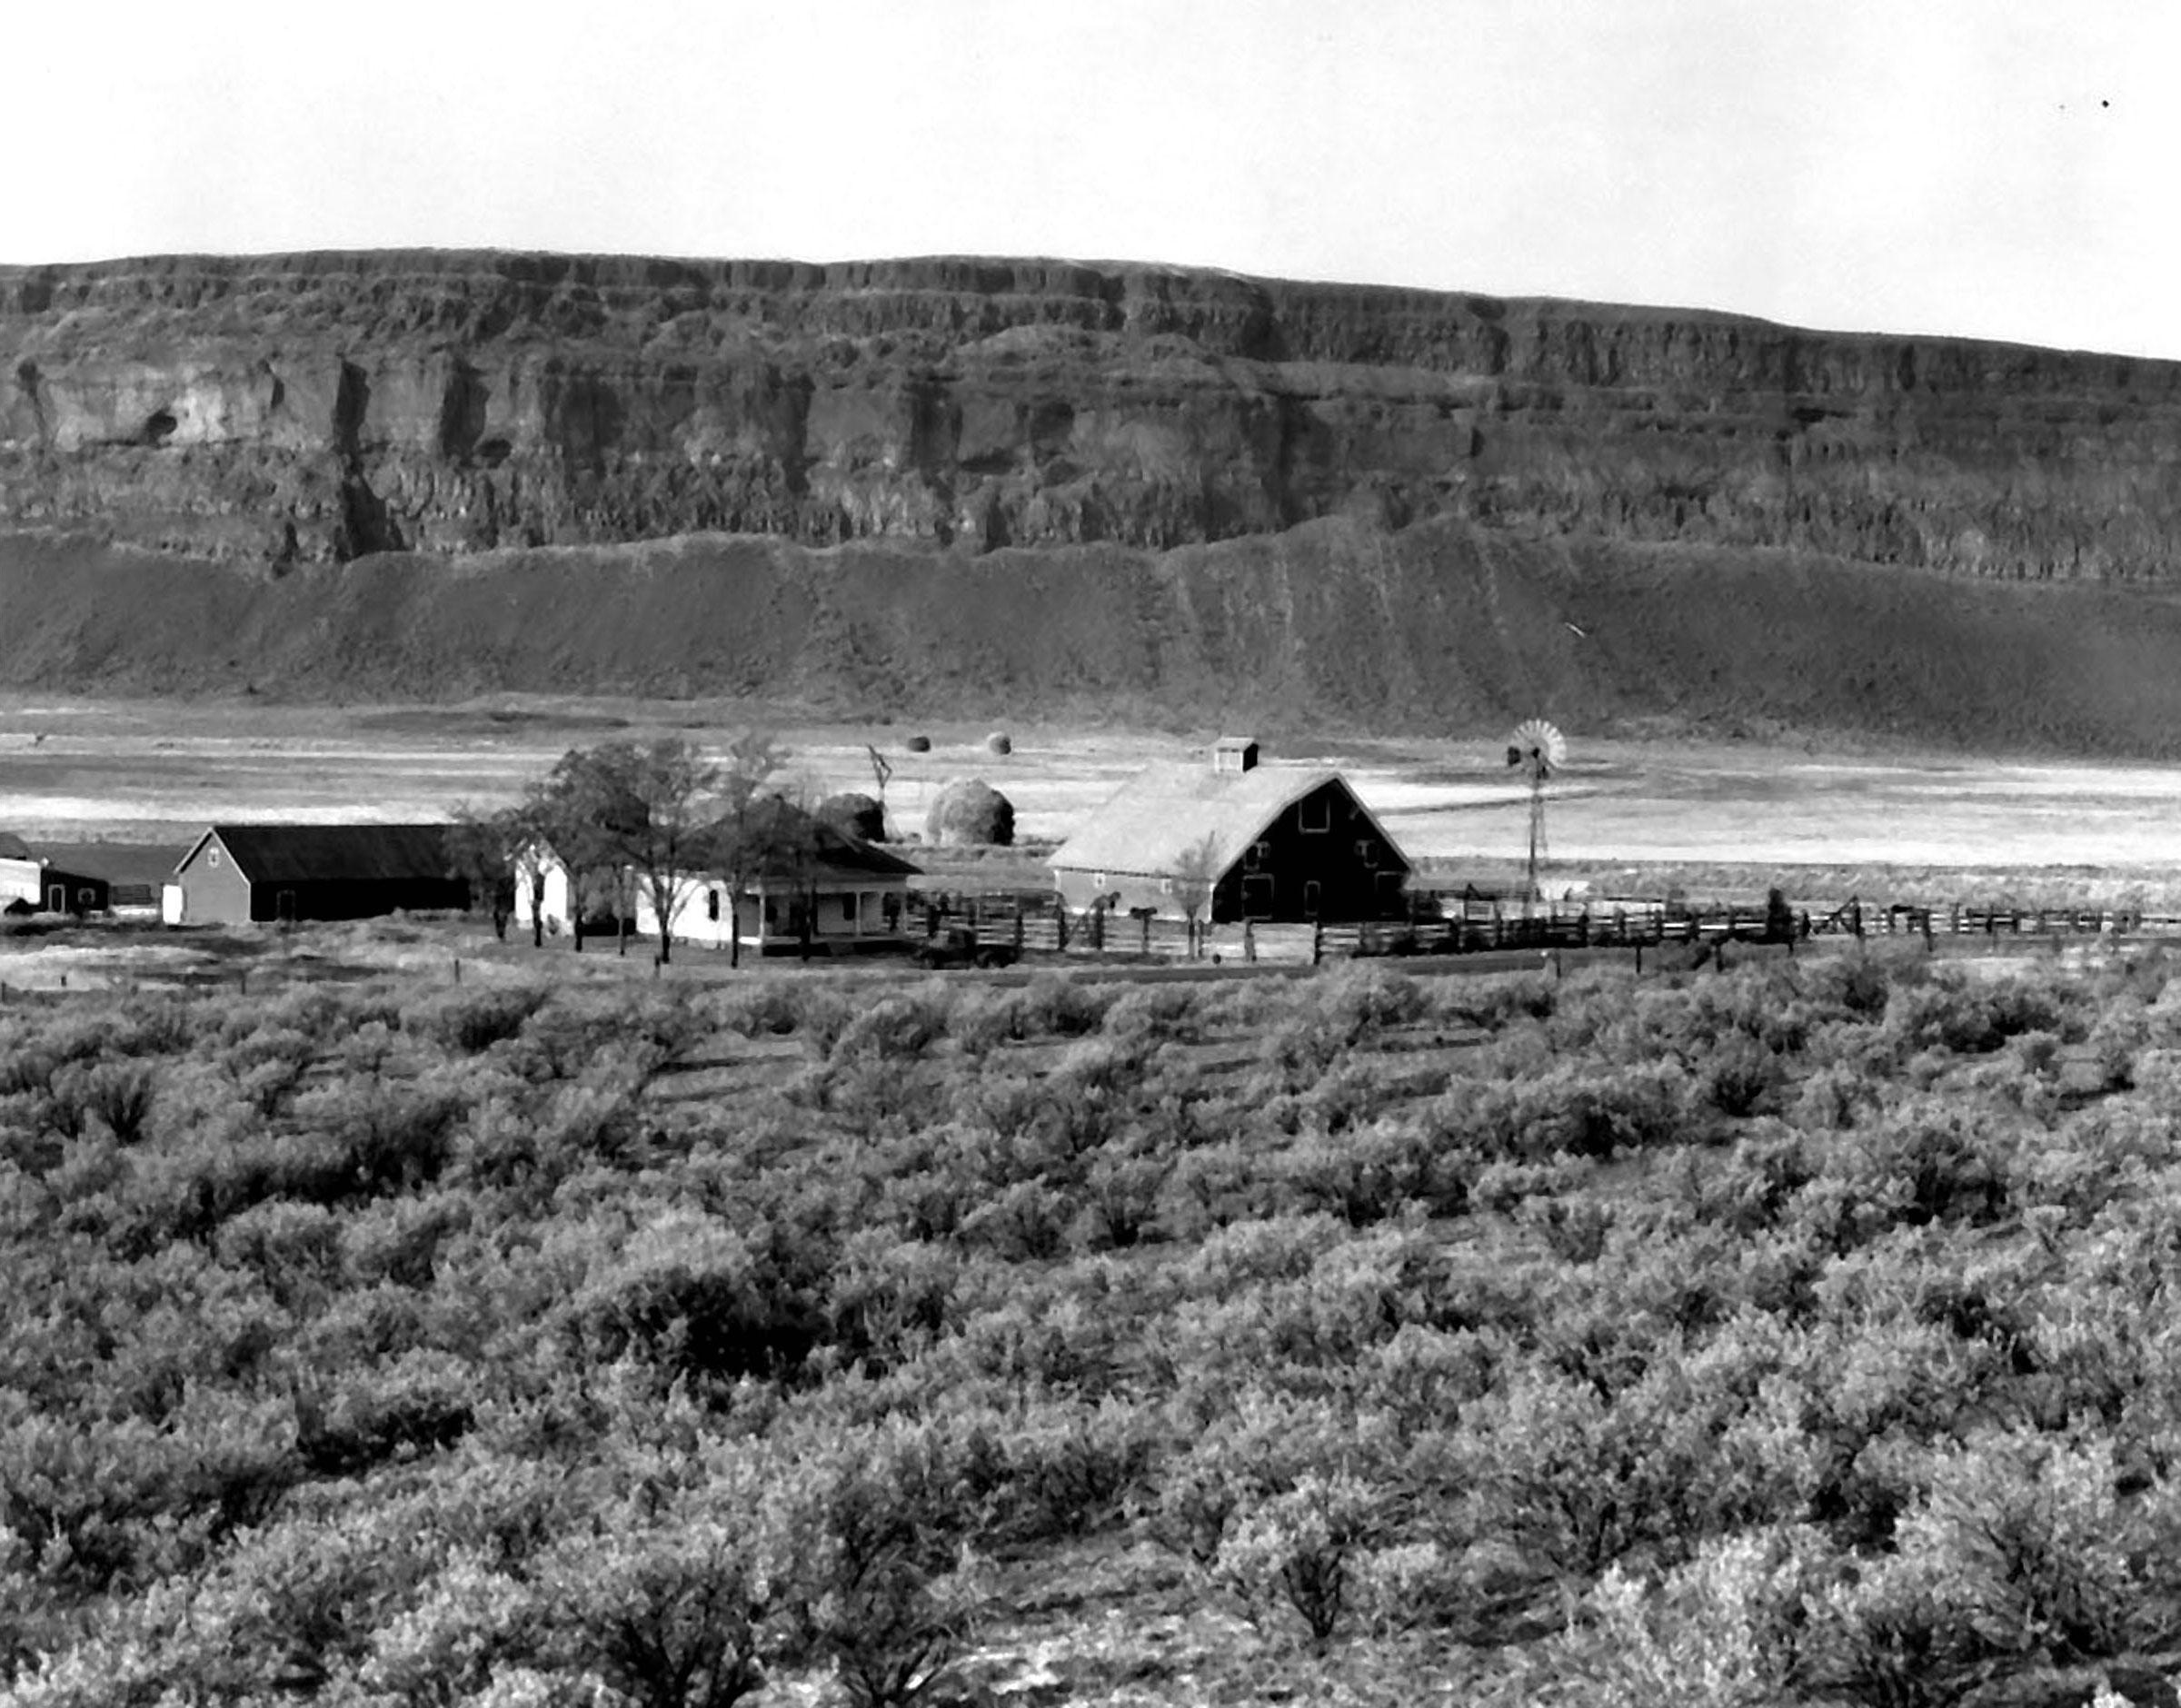 November 19, 1946. The Dave Lewis farm in the Upper Grand Coulee will be flooded by the equalizing reservoir from Grand Coulee Dam.